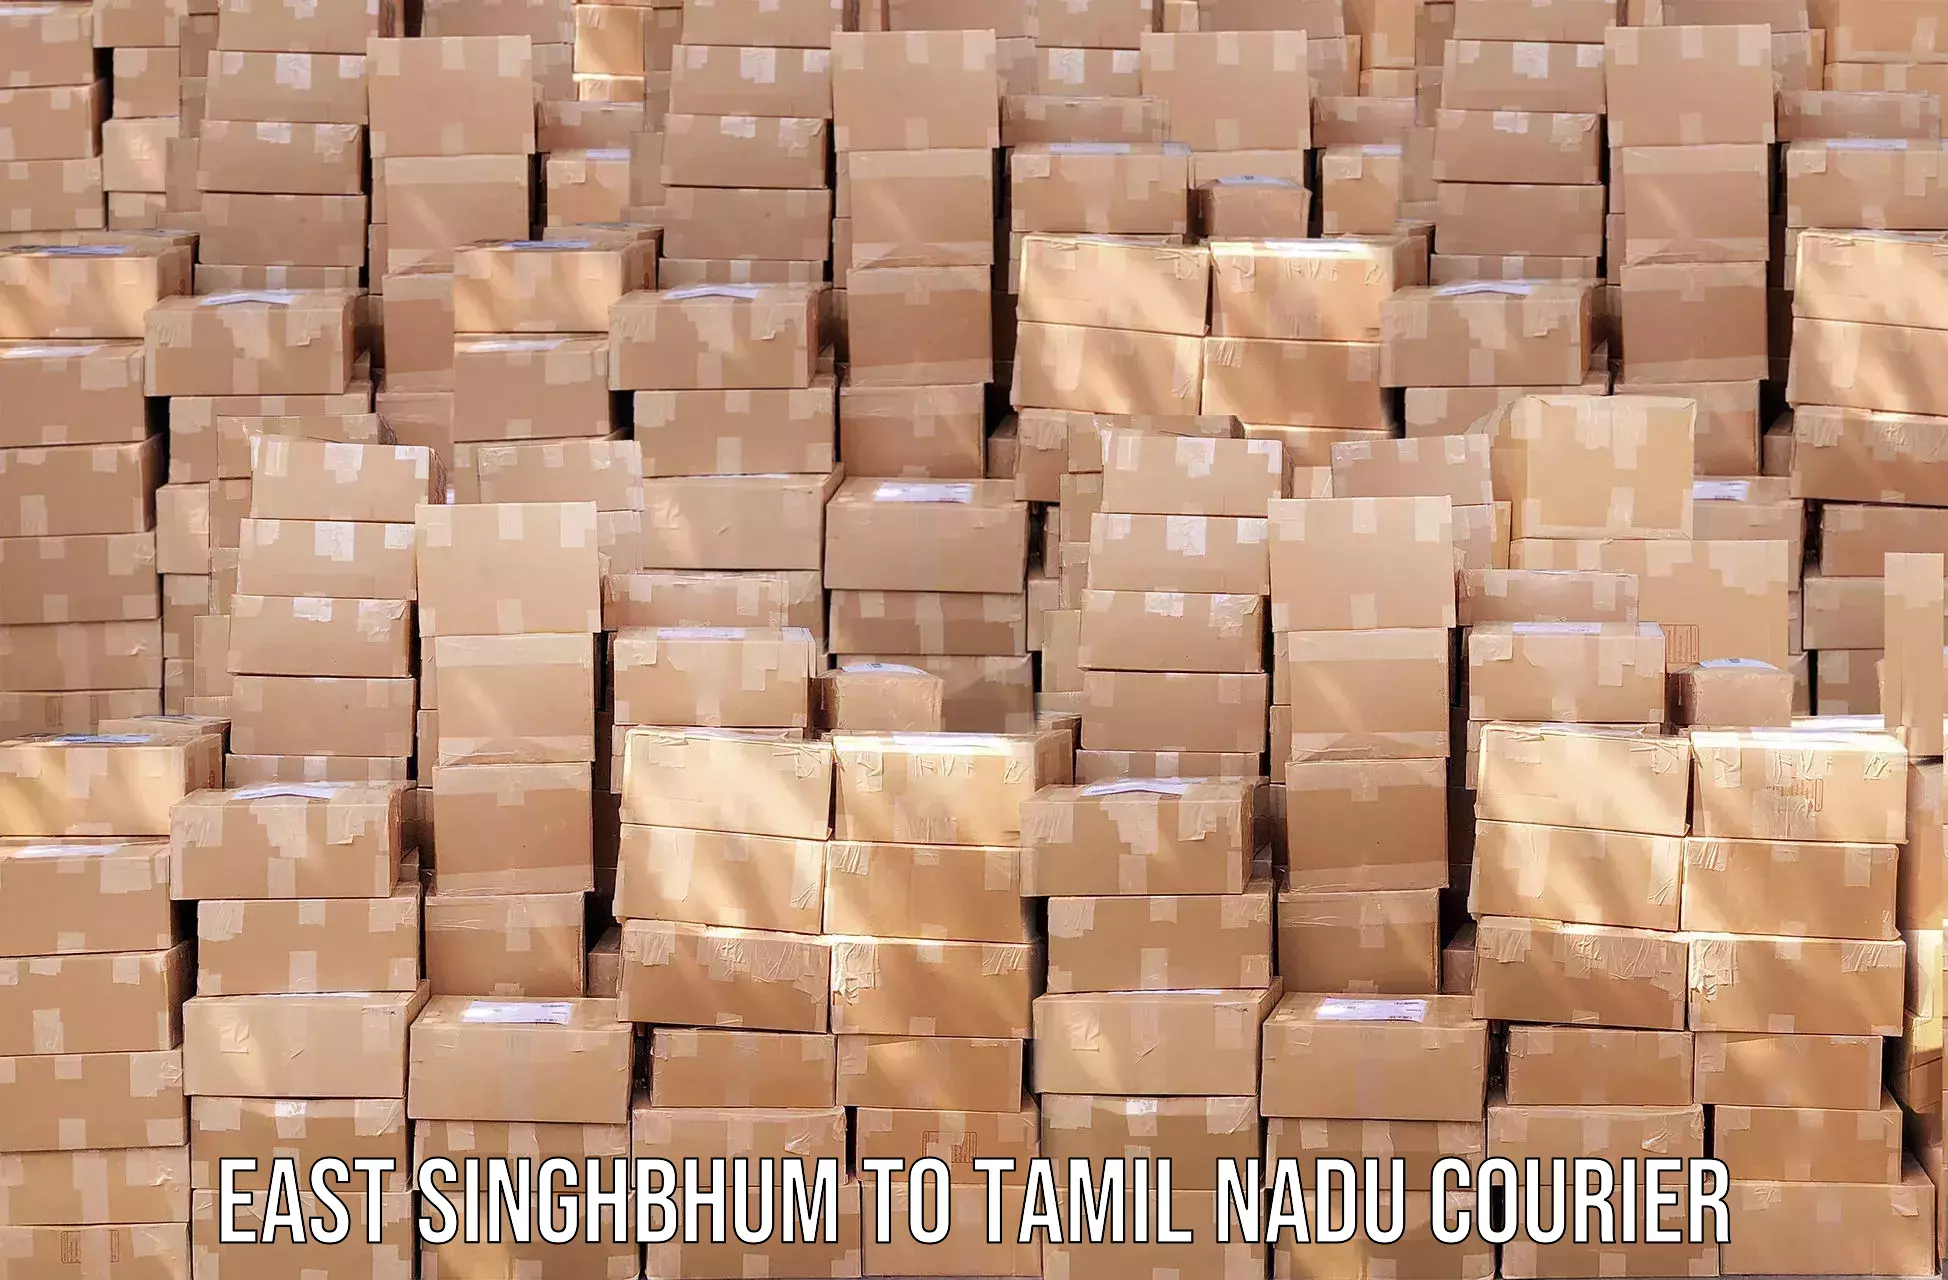 Modern courier technology in East Singhbhum to Tamil Nadu Veterinary and Animal Sciences University Chennai